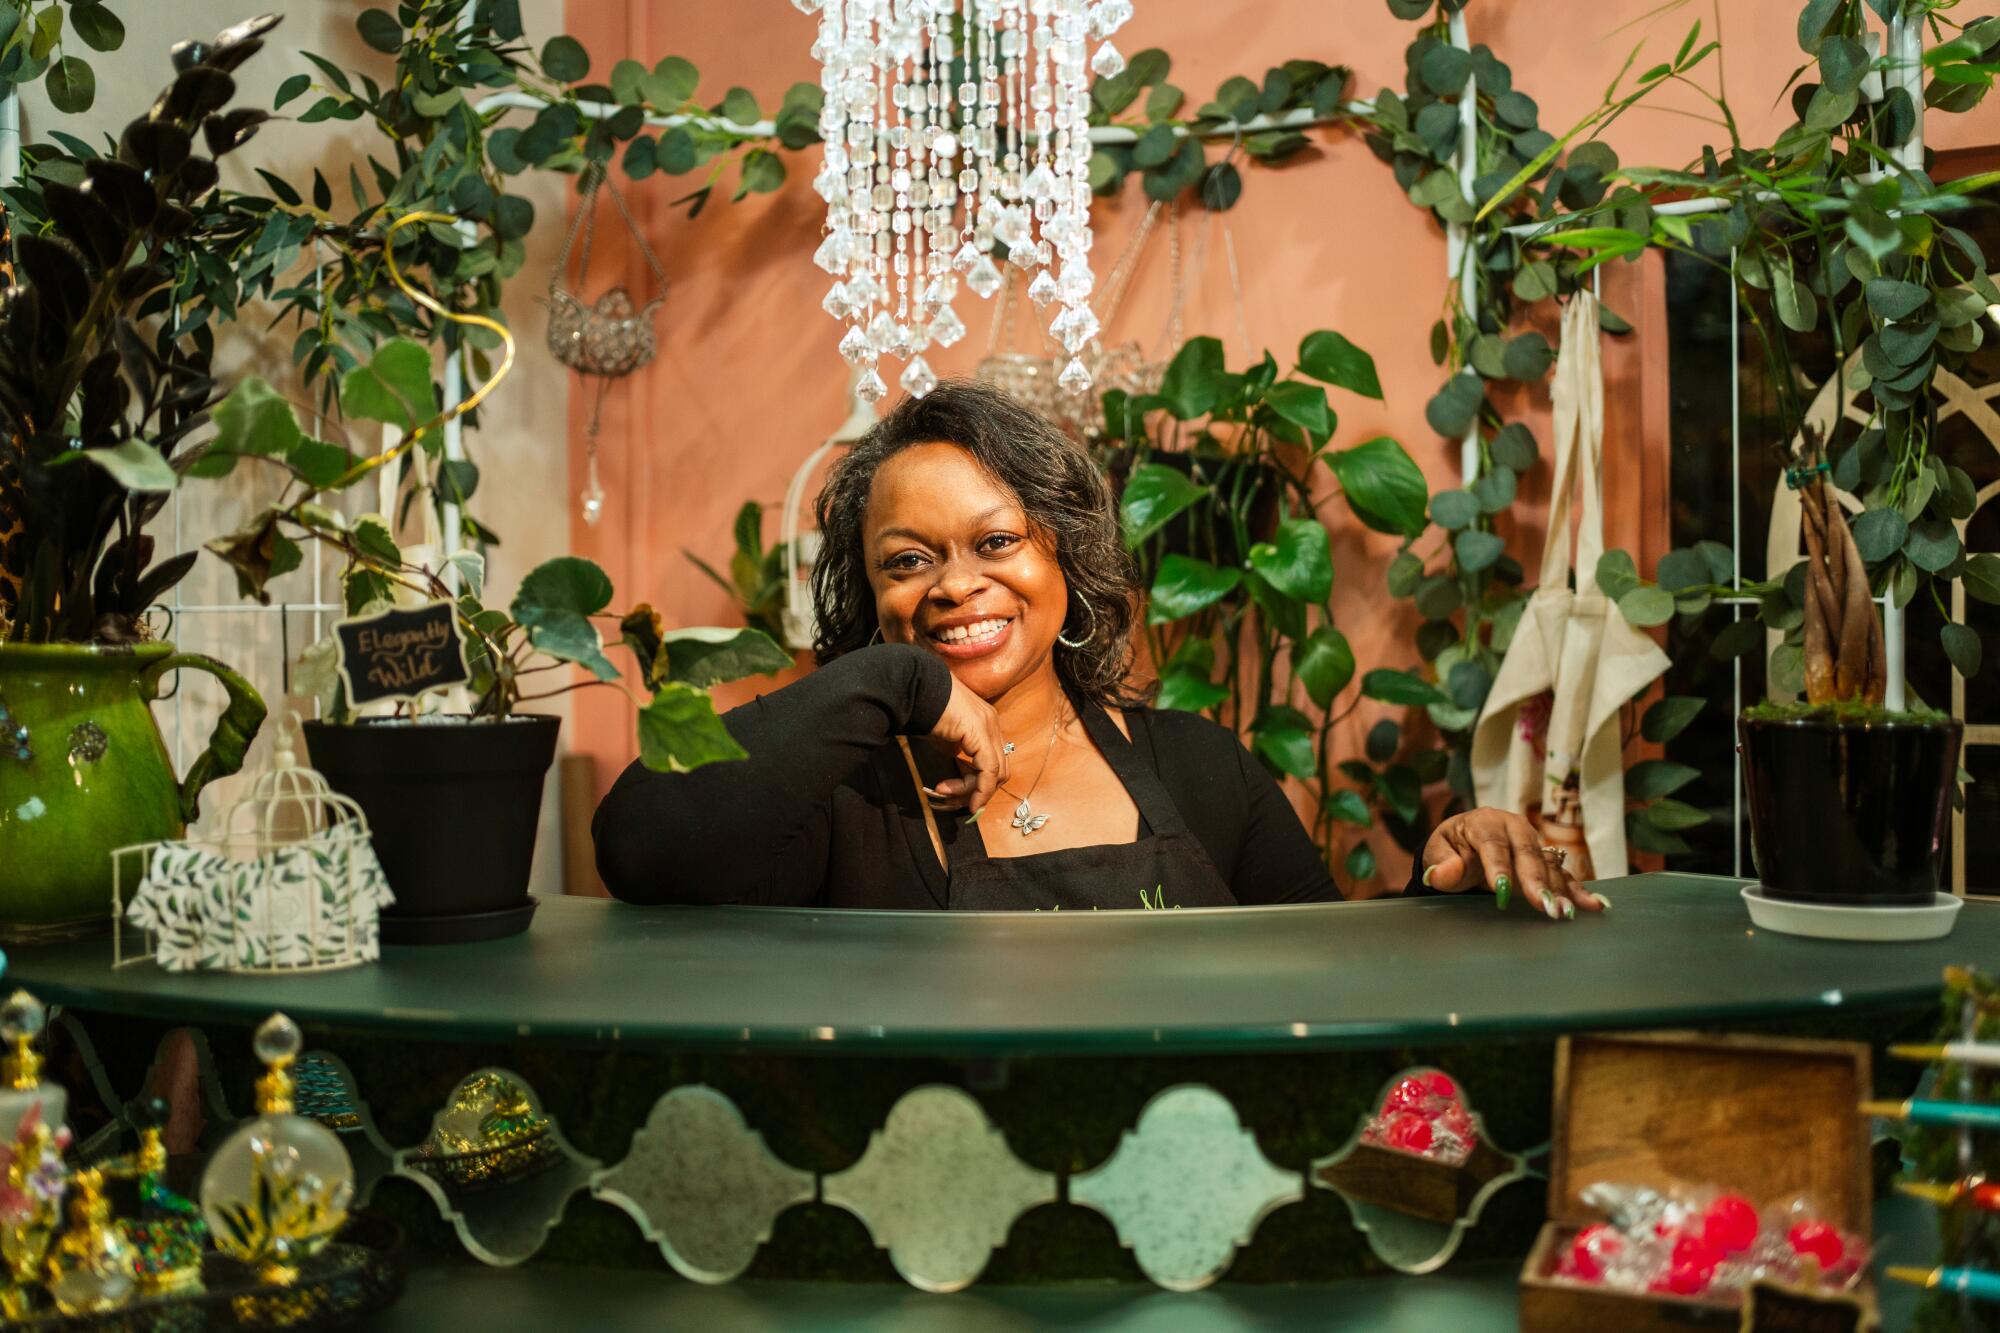 A smiling woman stands behind the green counter in a plant store with peach walls